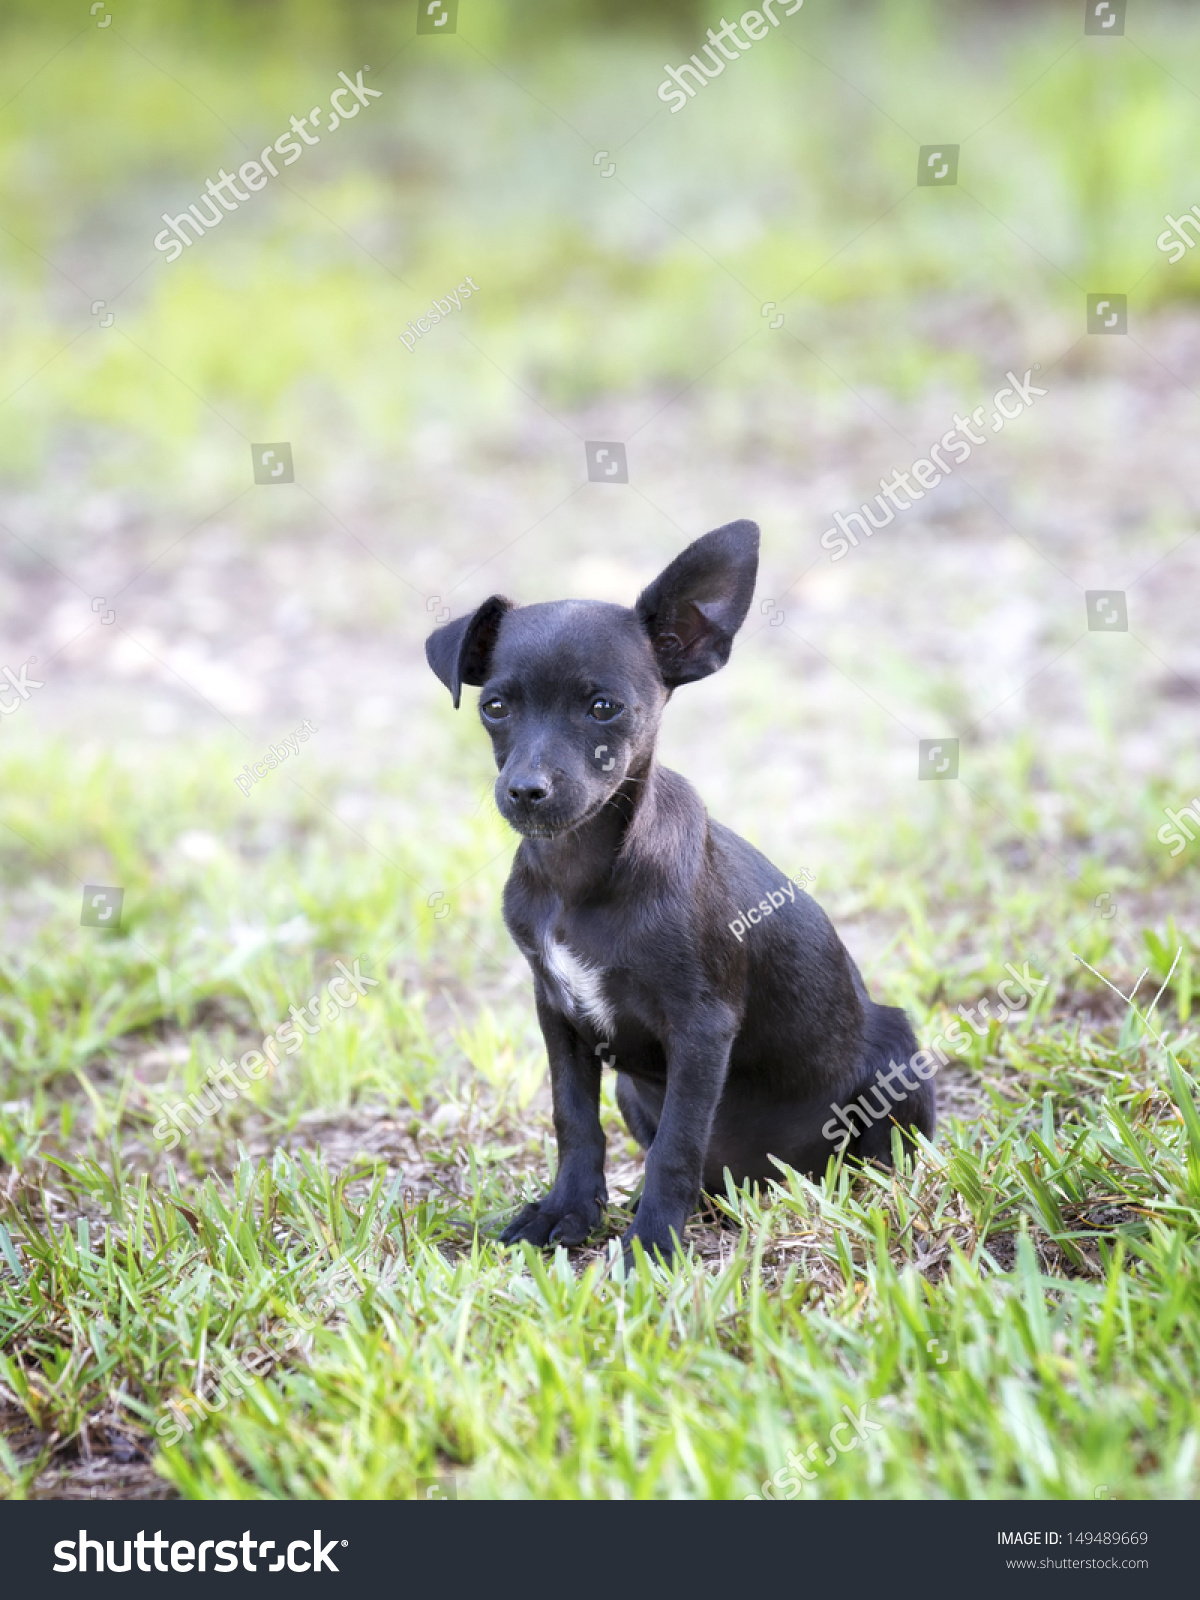 Black Chihuahua Puppy Floppy Ear Stock Photo Edit Now 149489669